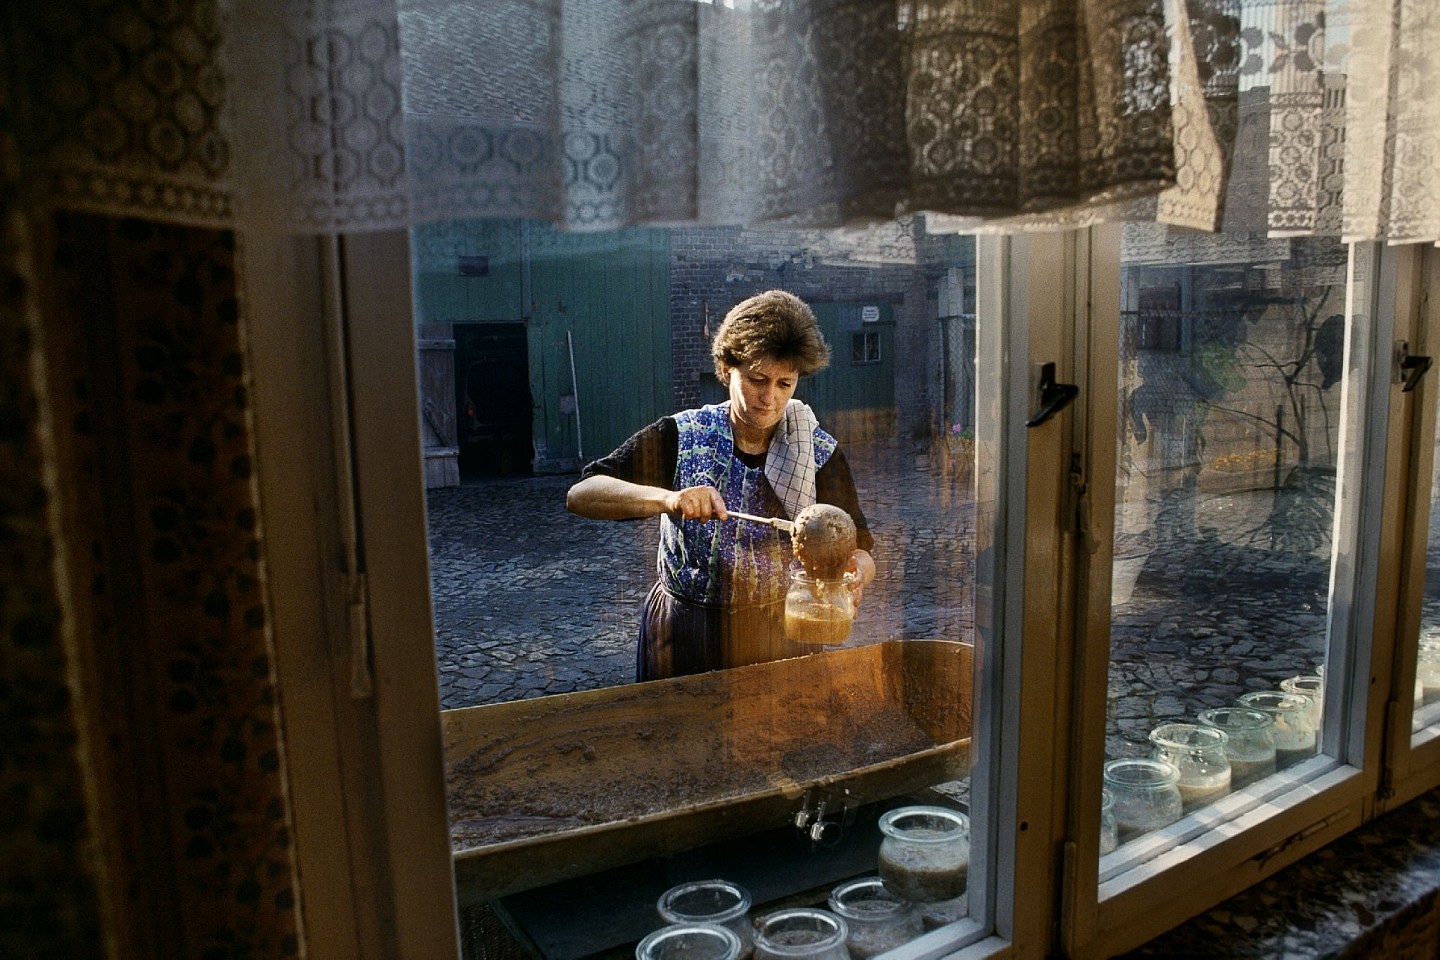 Steve McCurry, Woman Ladles Food into Jars, 1989
FujiFlex Crystal Archive Print
Price/Size on request